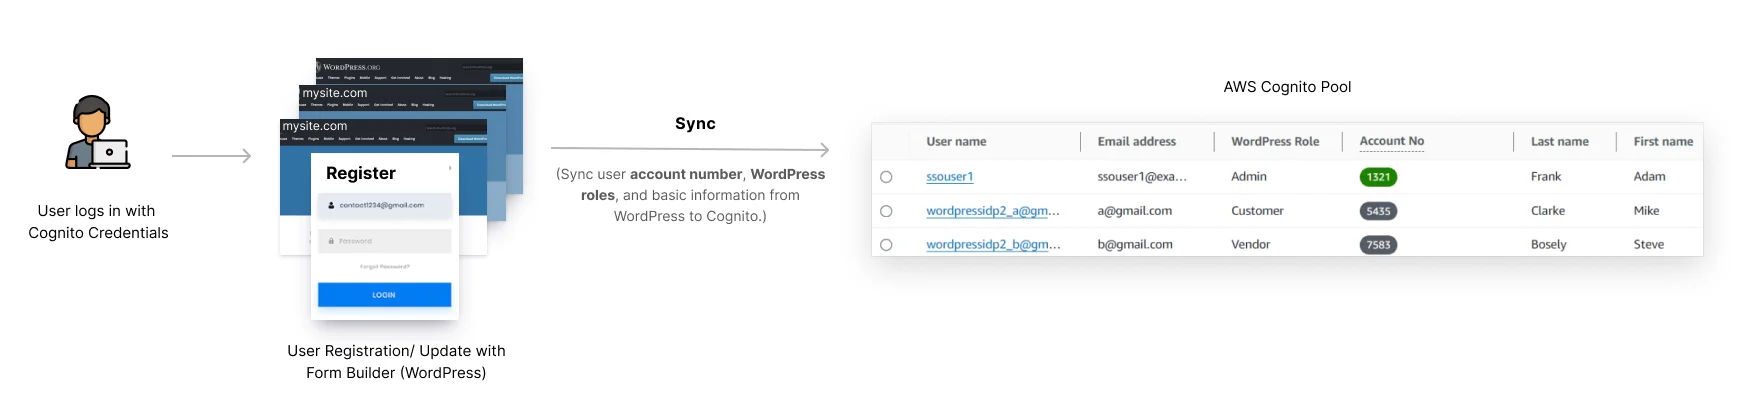 Registration - SSO and User Sync between WordPress and AWS Cognito